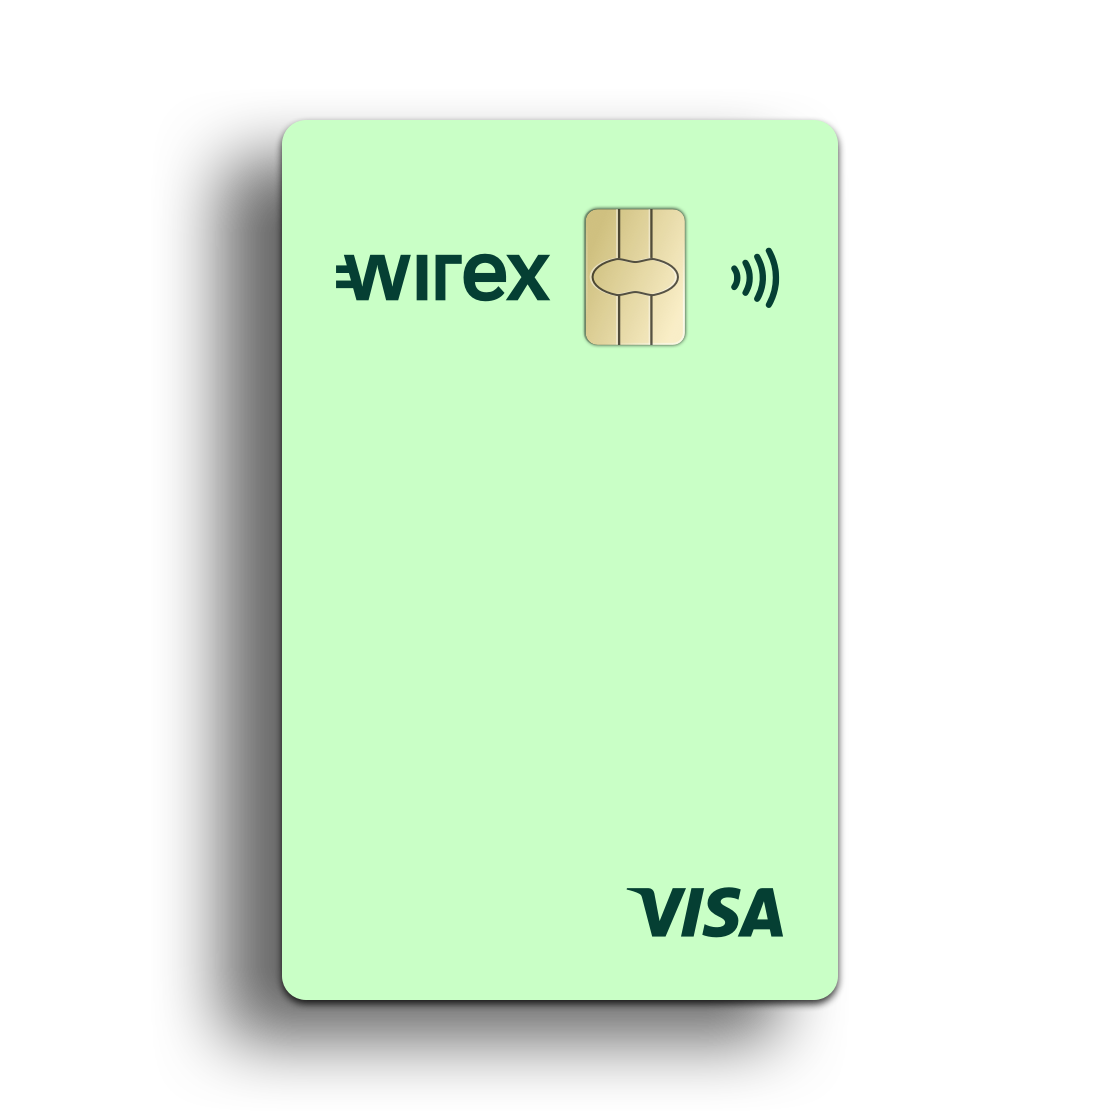 Wirex Debit Card Review: Pros and Cons, Fees - ReadBTC